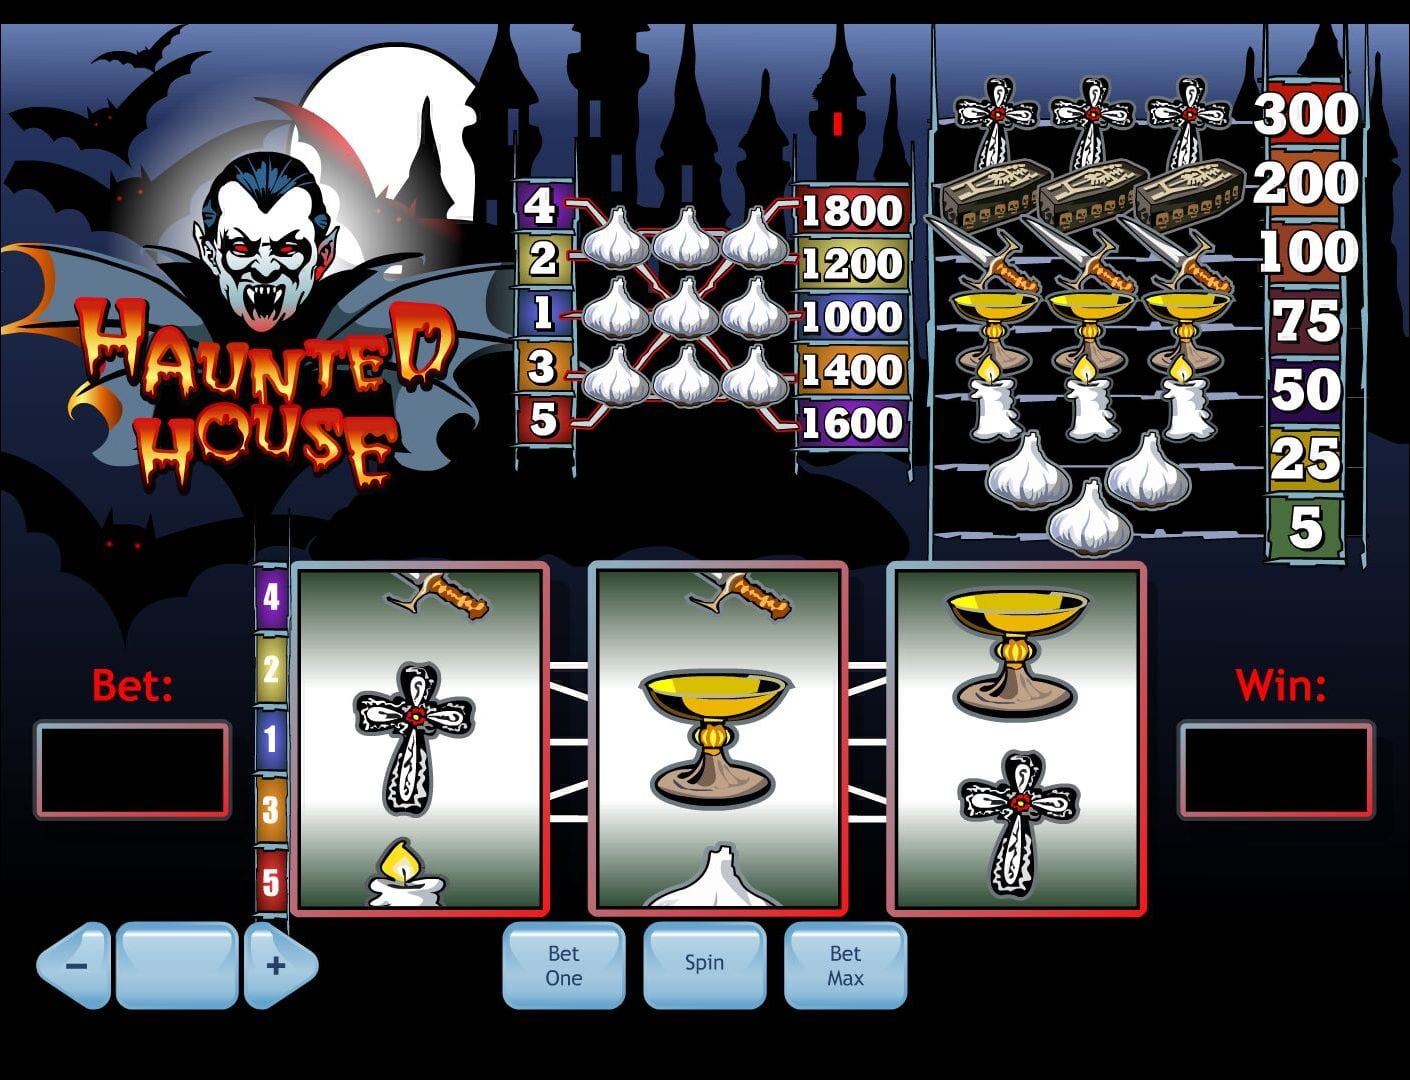 Haunted House Free Online Slot